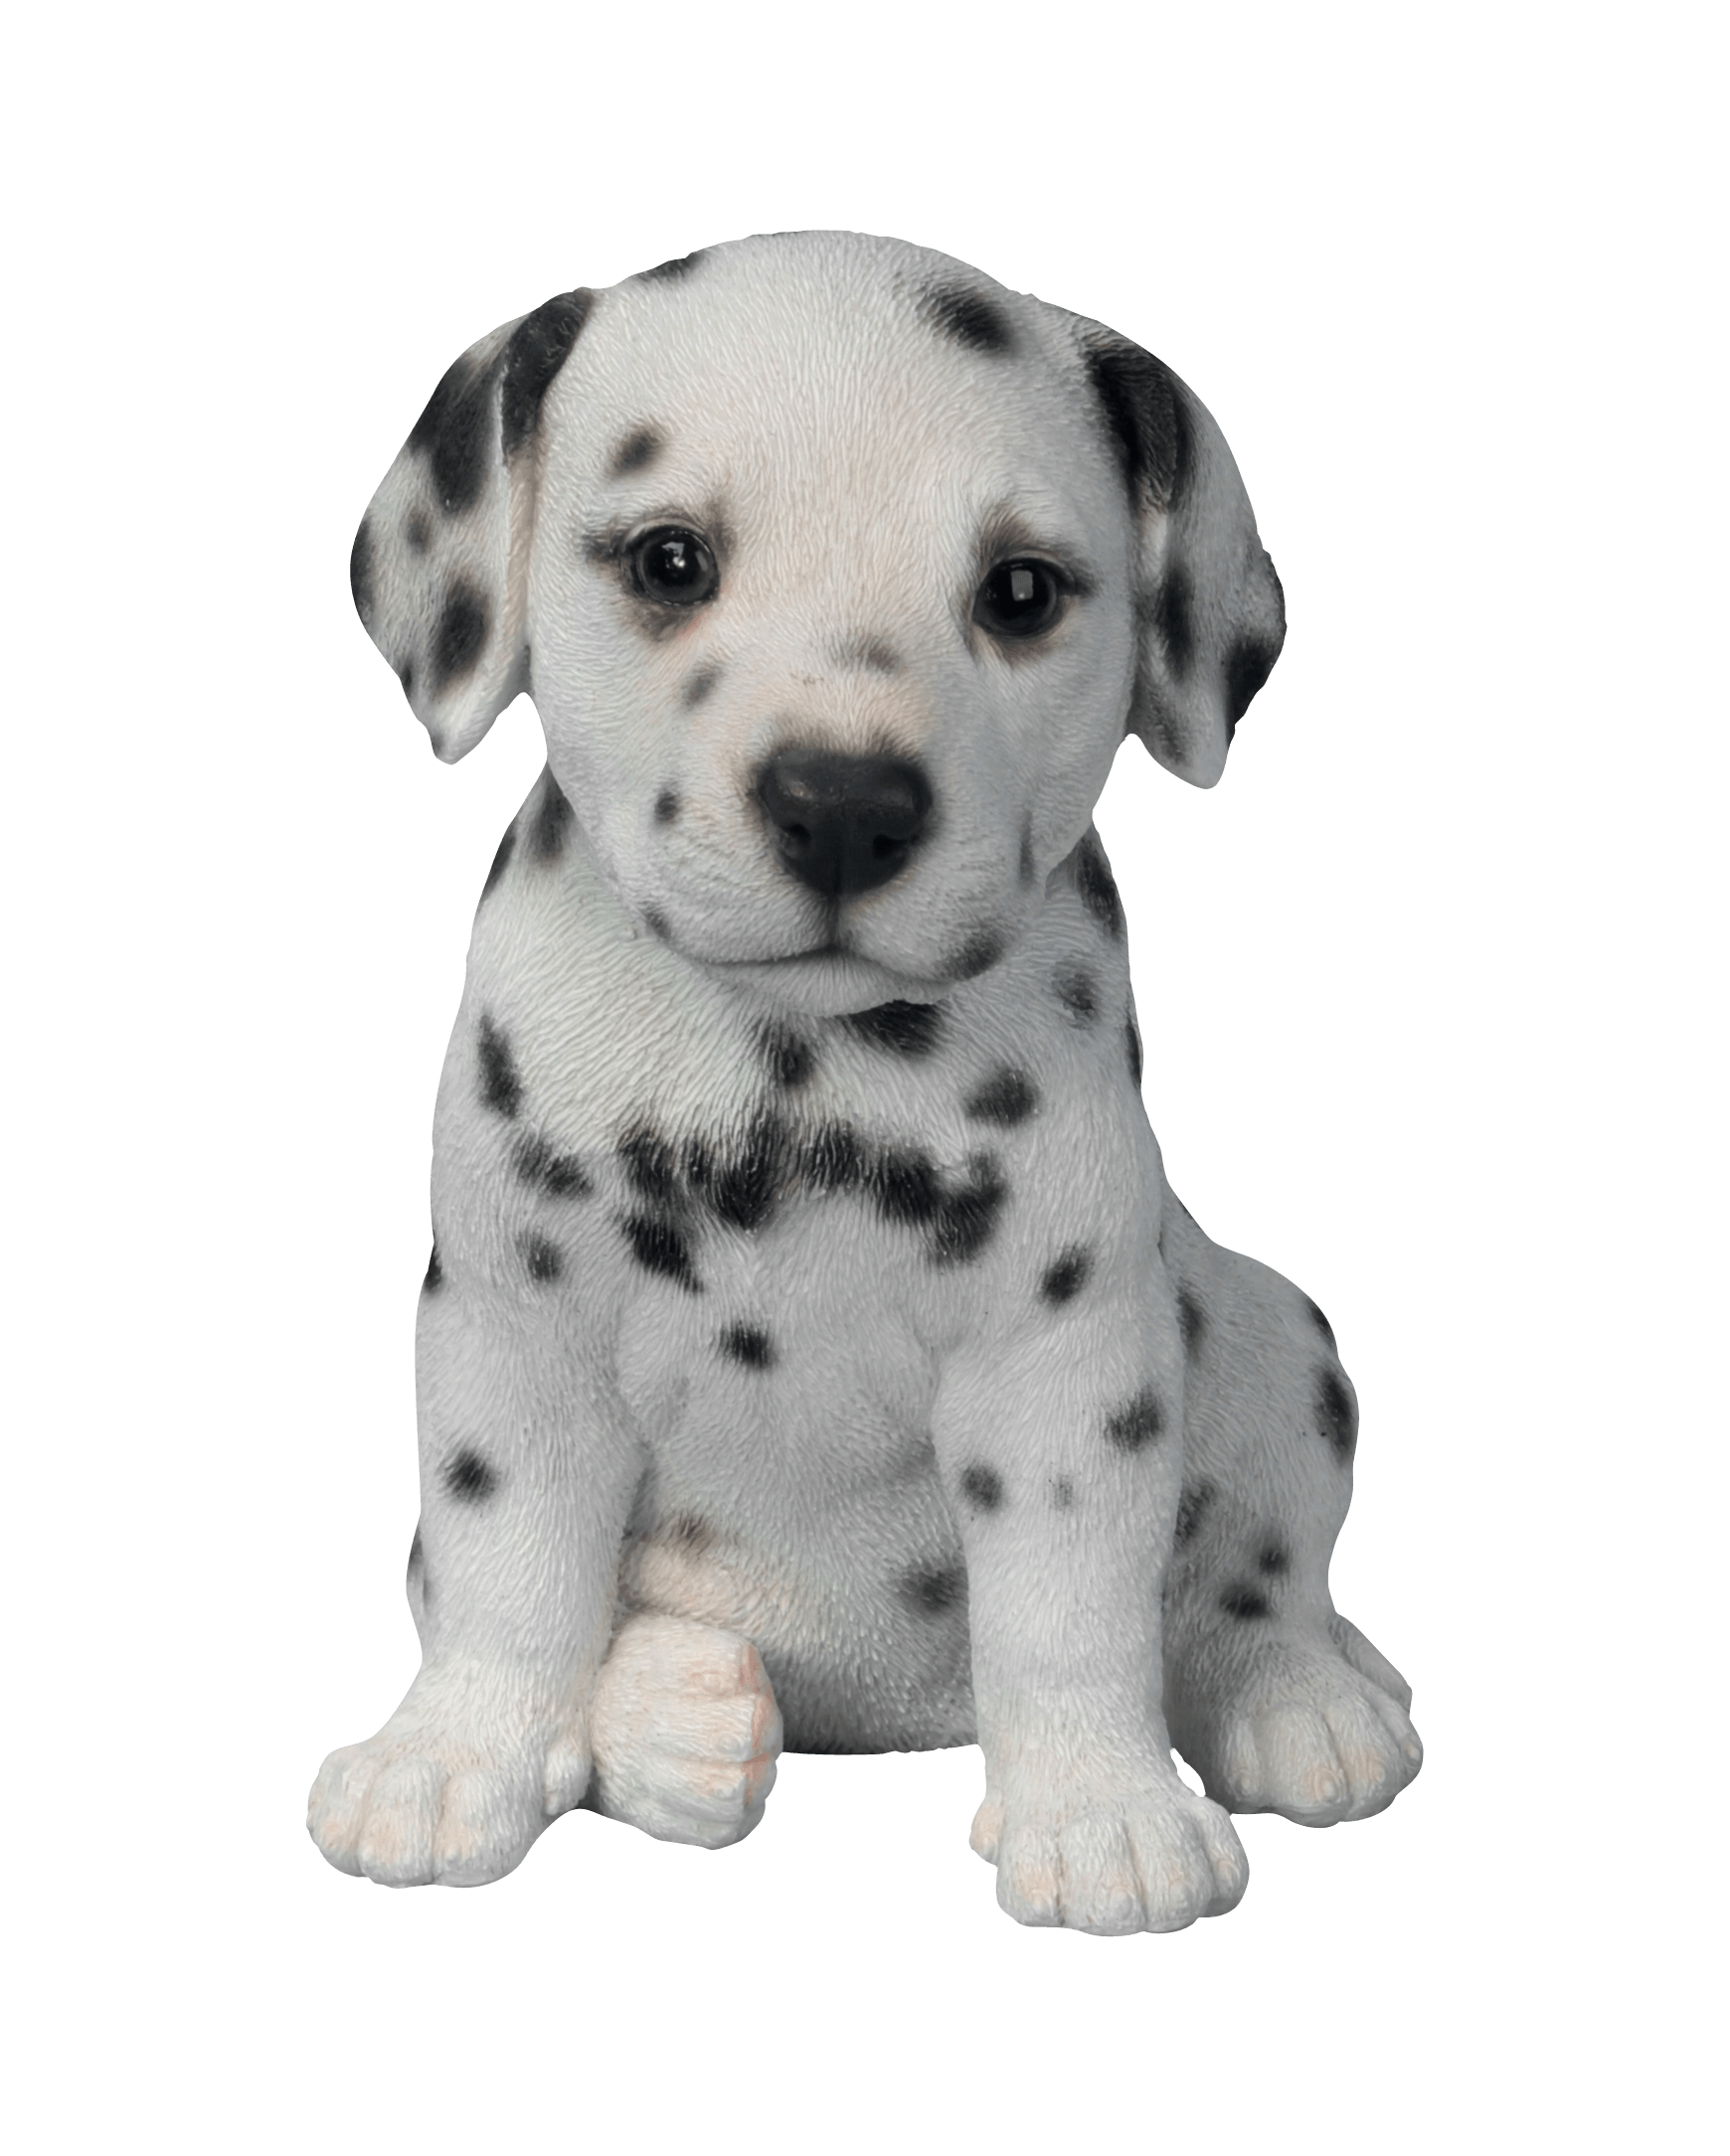 PNG HD Of Puppies - 138272